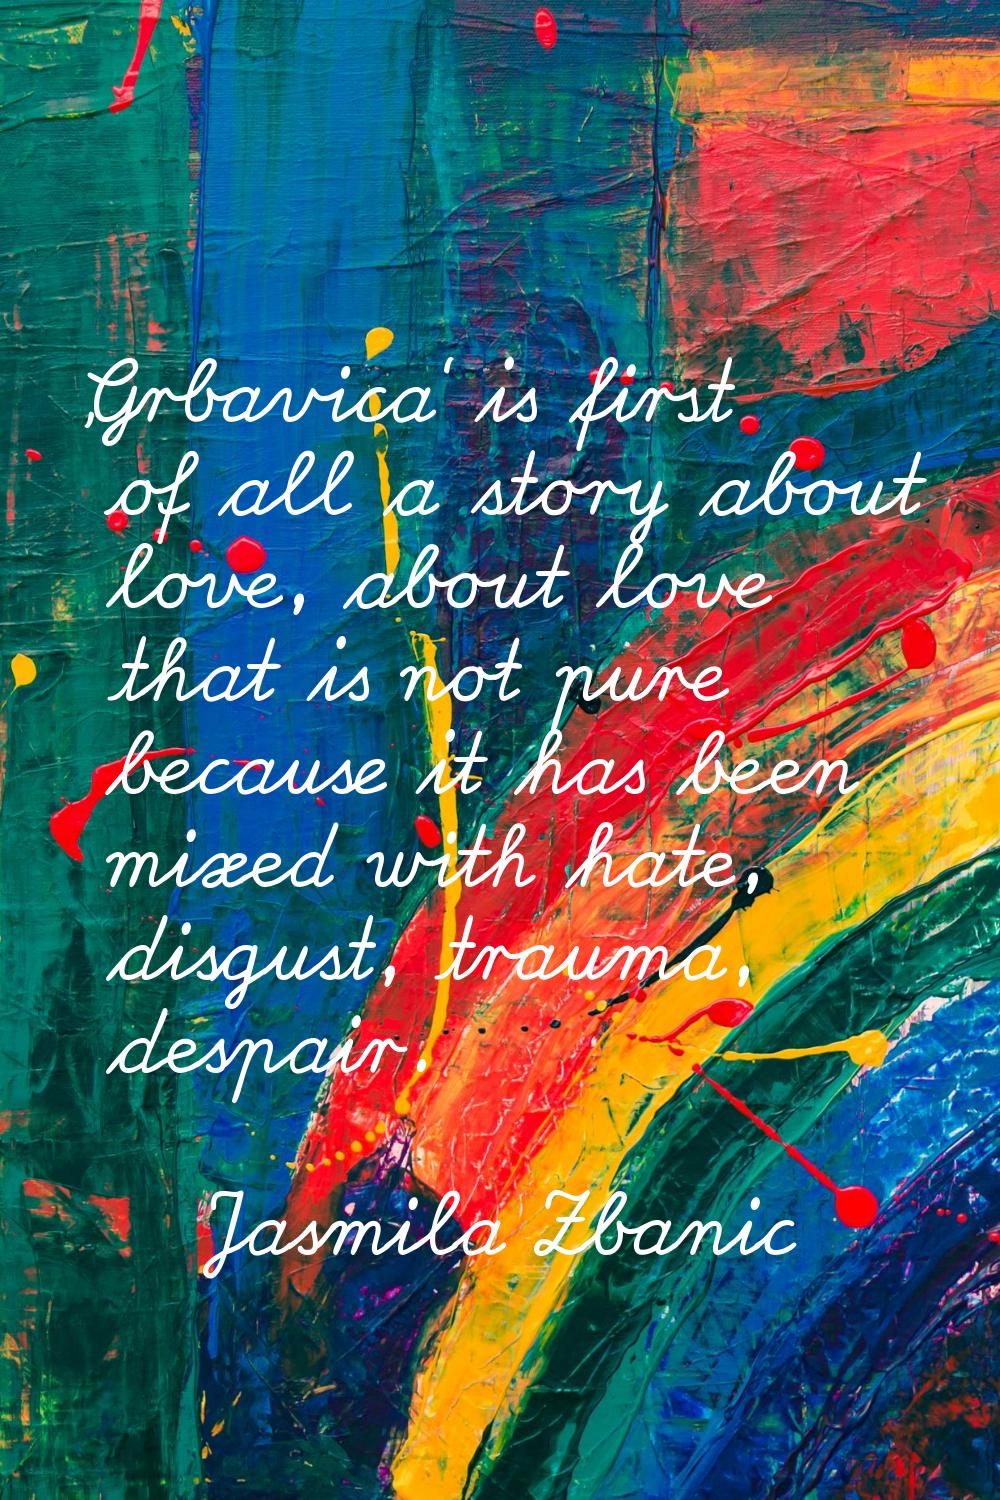 'Grbavica' is first of all a story about love, about love that is not pure because it has been mixe